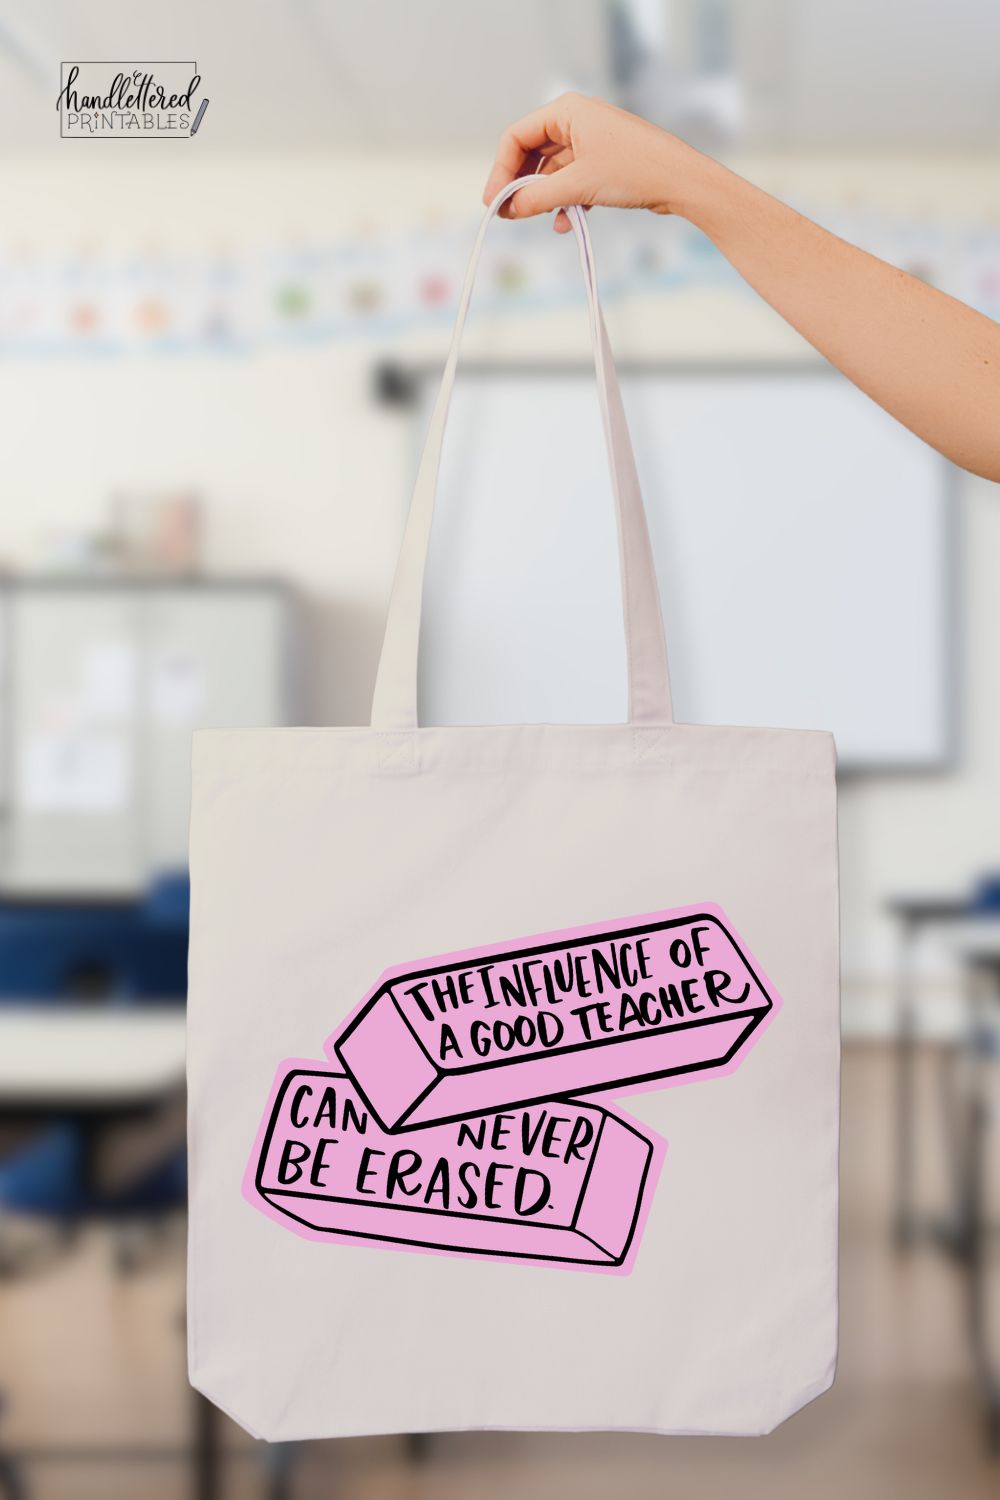 'The influence of a good teacher can never be erased' hand lettered SVG design in black iron on vinyl with pink background on tote bag held in front of classroom